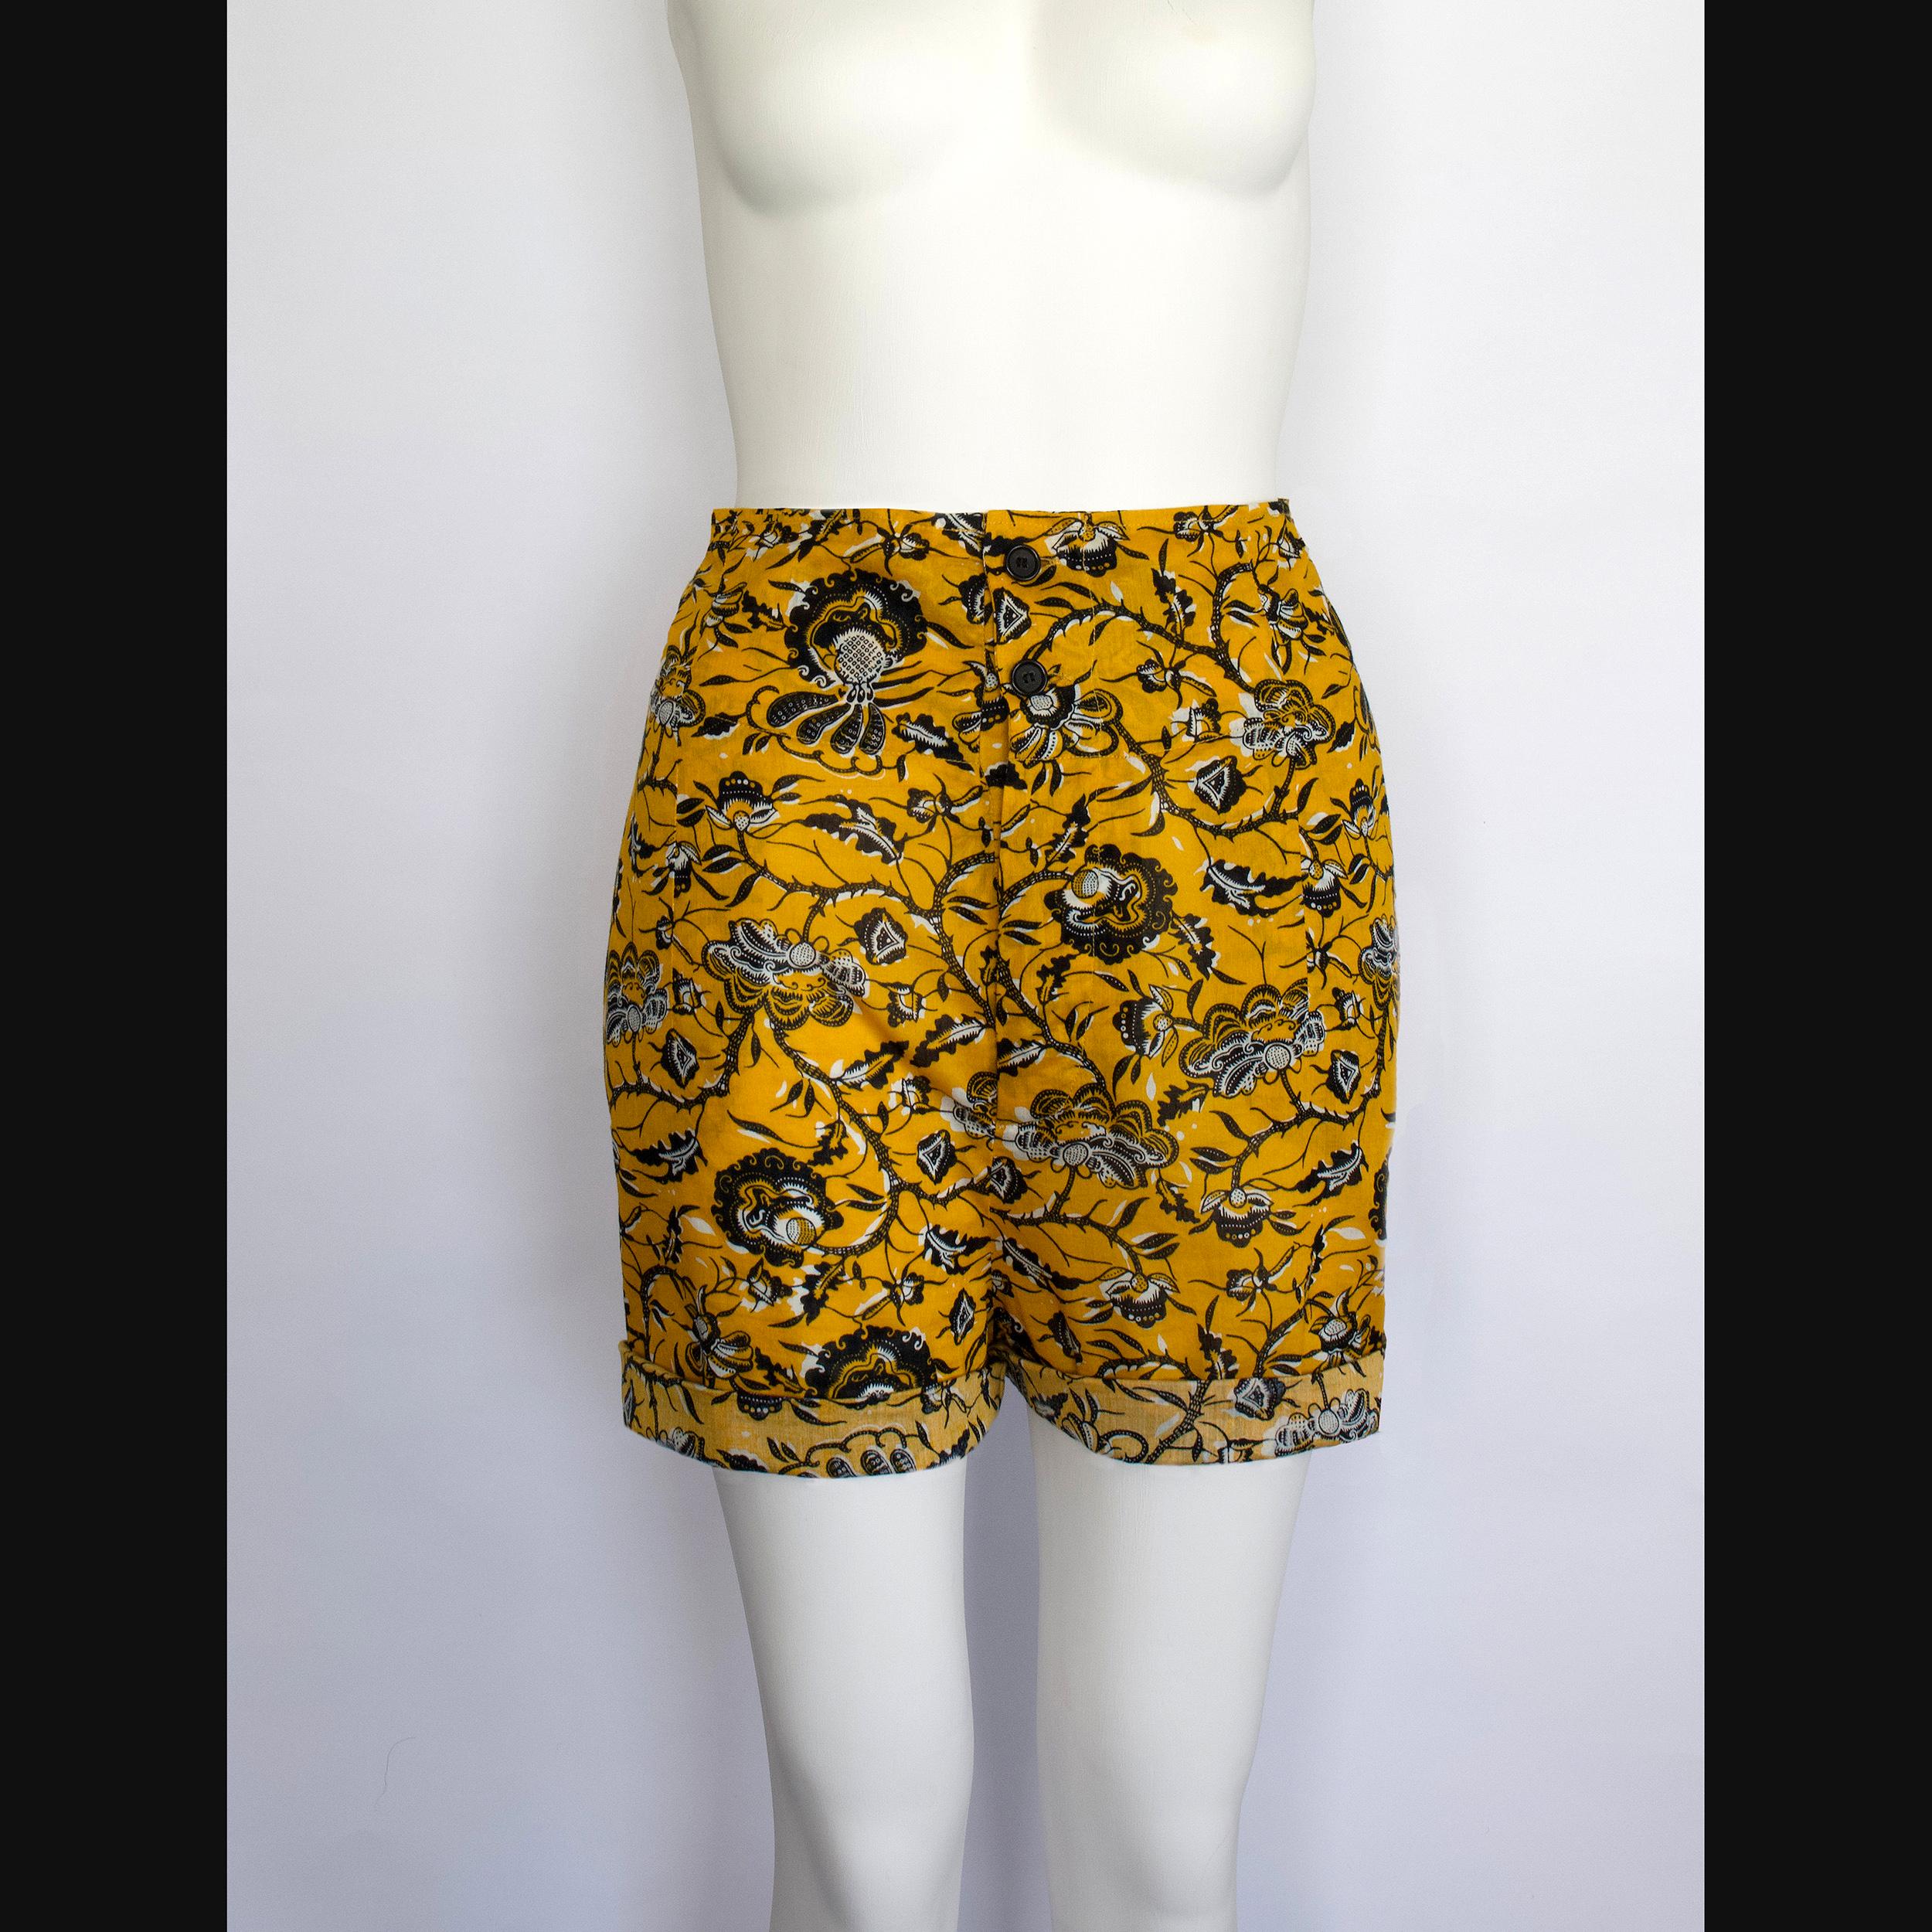 Isabel Marant Etoile - Shorts - Cotton - Yellow, Black + White Floral Print  In Good Condition In KENT, GB